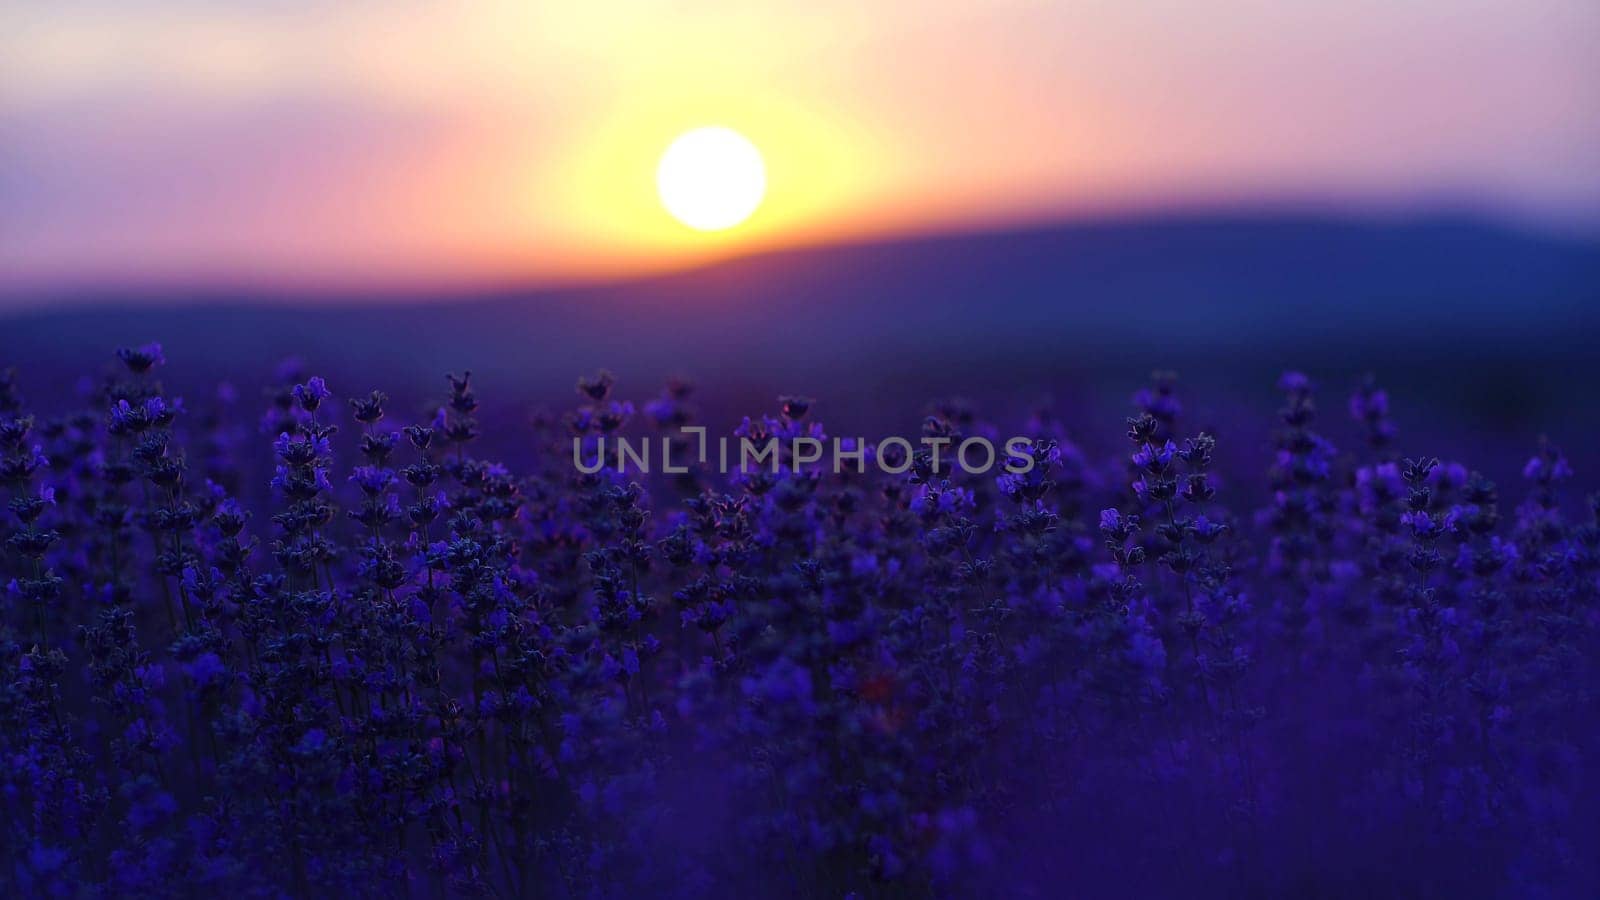 Lavender field at sunset. Blooming purple fragrant lavender flowers against the backdrop of a sunset sky by Matiunina